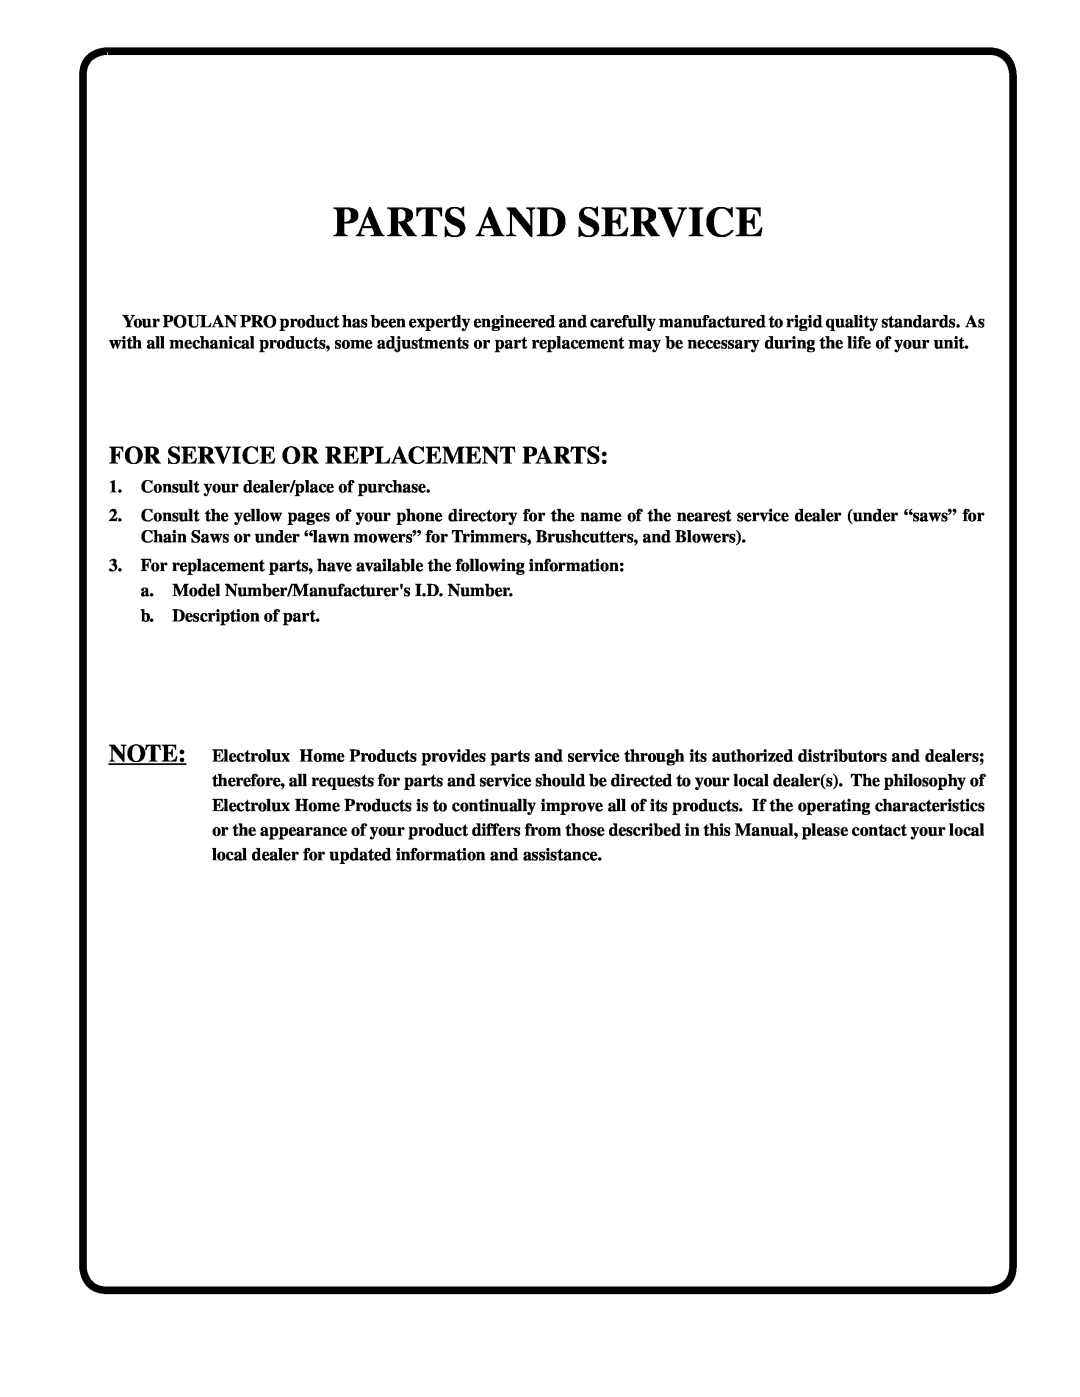 Poulan 954567833, 186914 owner manual Parts And Service, For Service Or Replacement Parts 